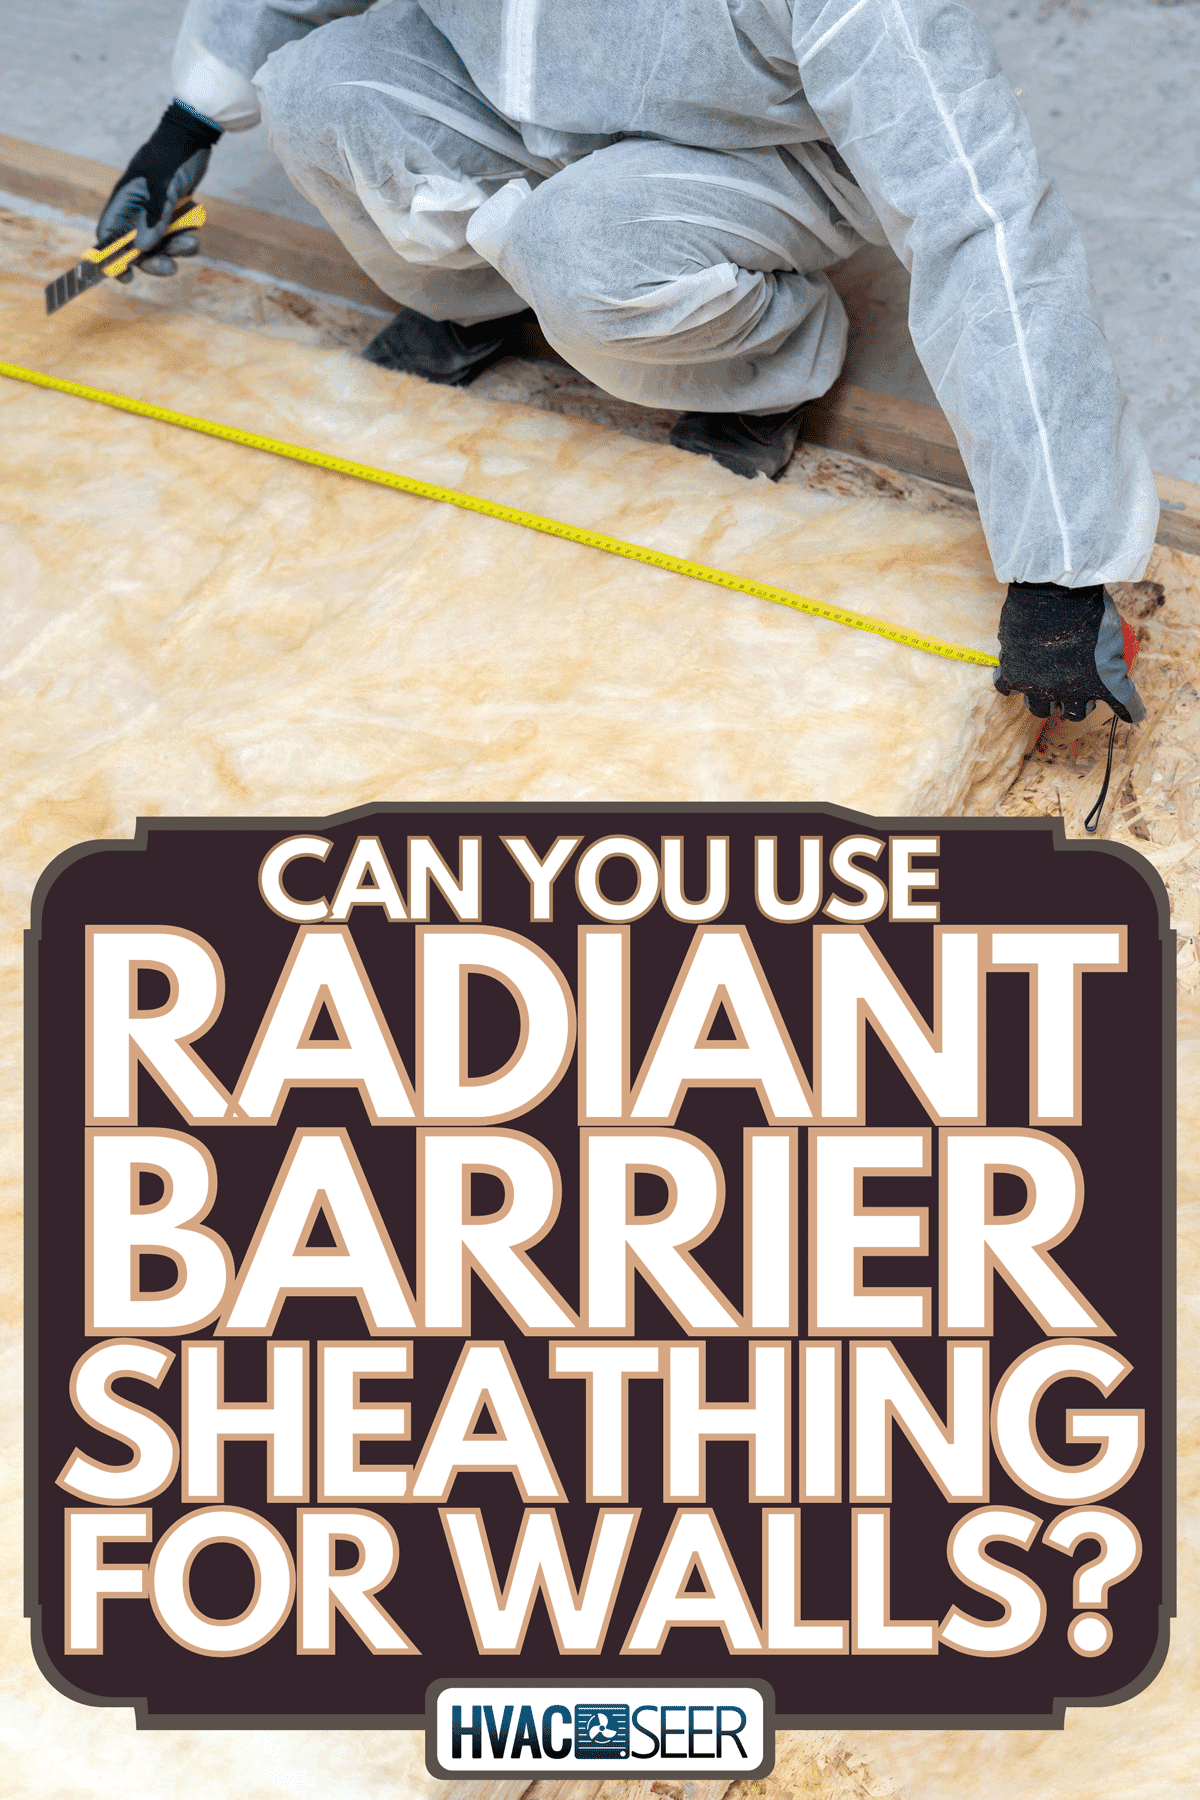 A reflective heat barrier and fiberglass cold barrier between the attic joists, Can You Use Radiant Barrier Sheathing For Walls?